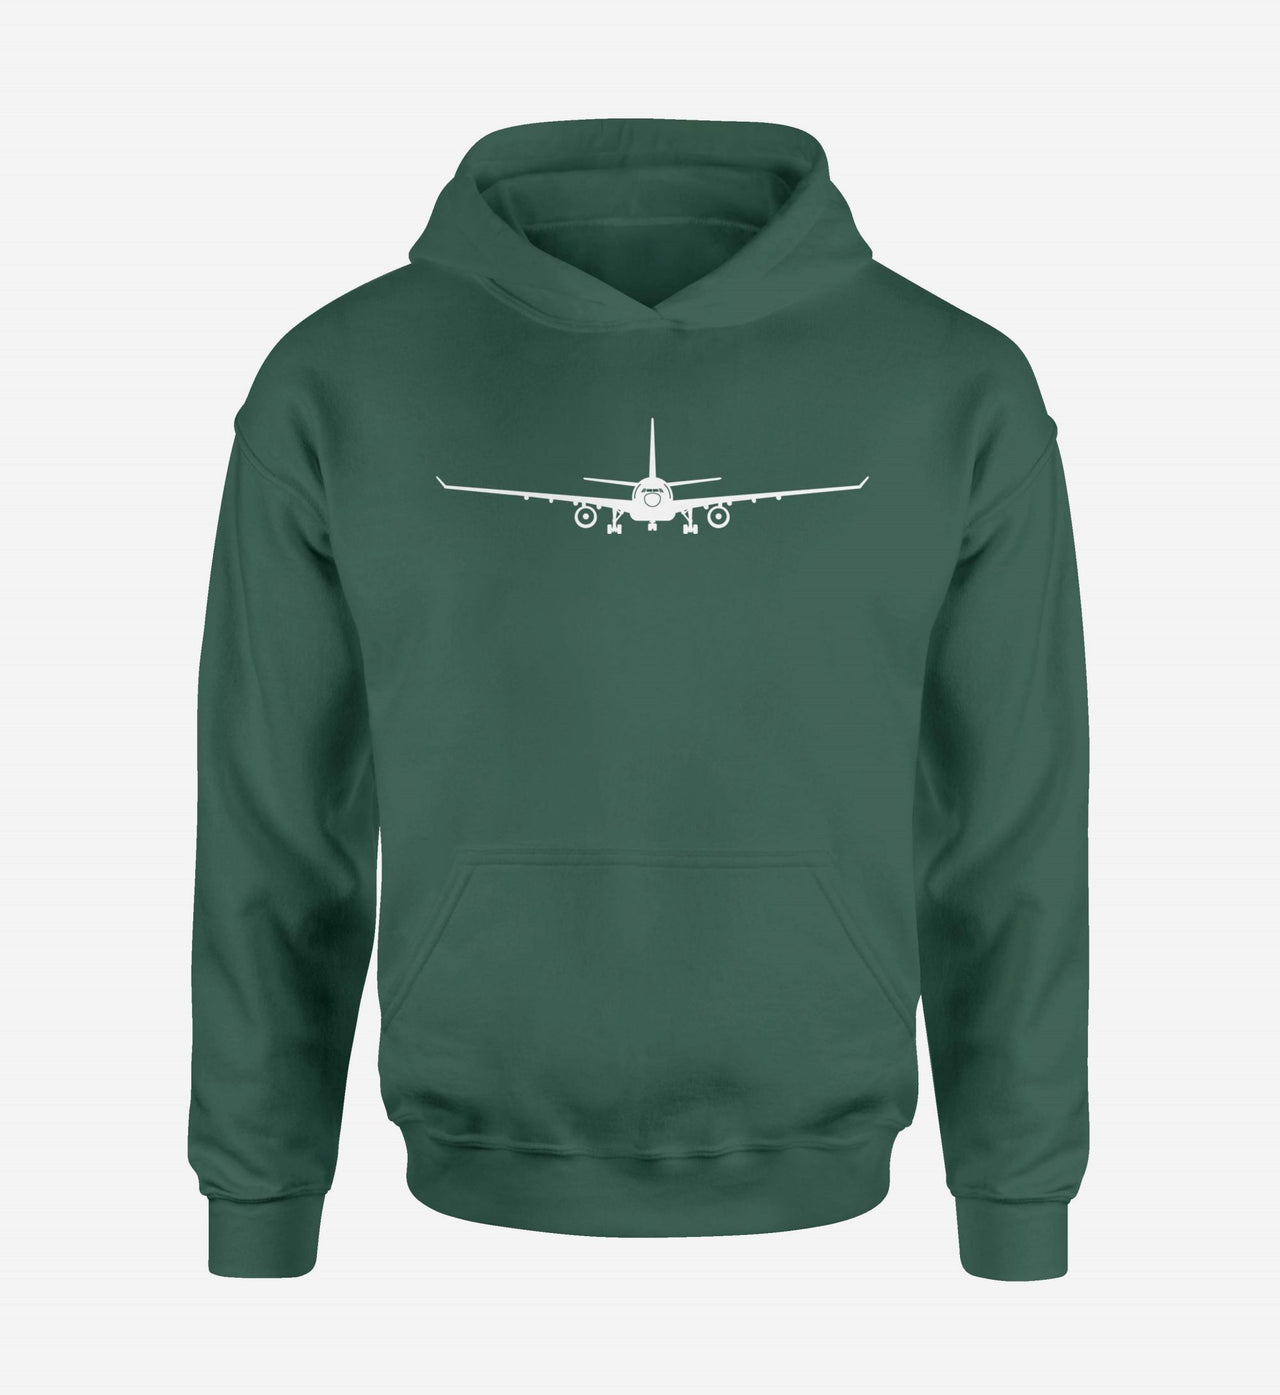 Airbus A330 Silhouette Designed Hoodies